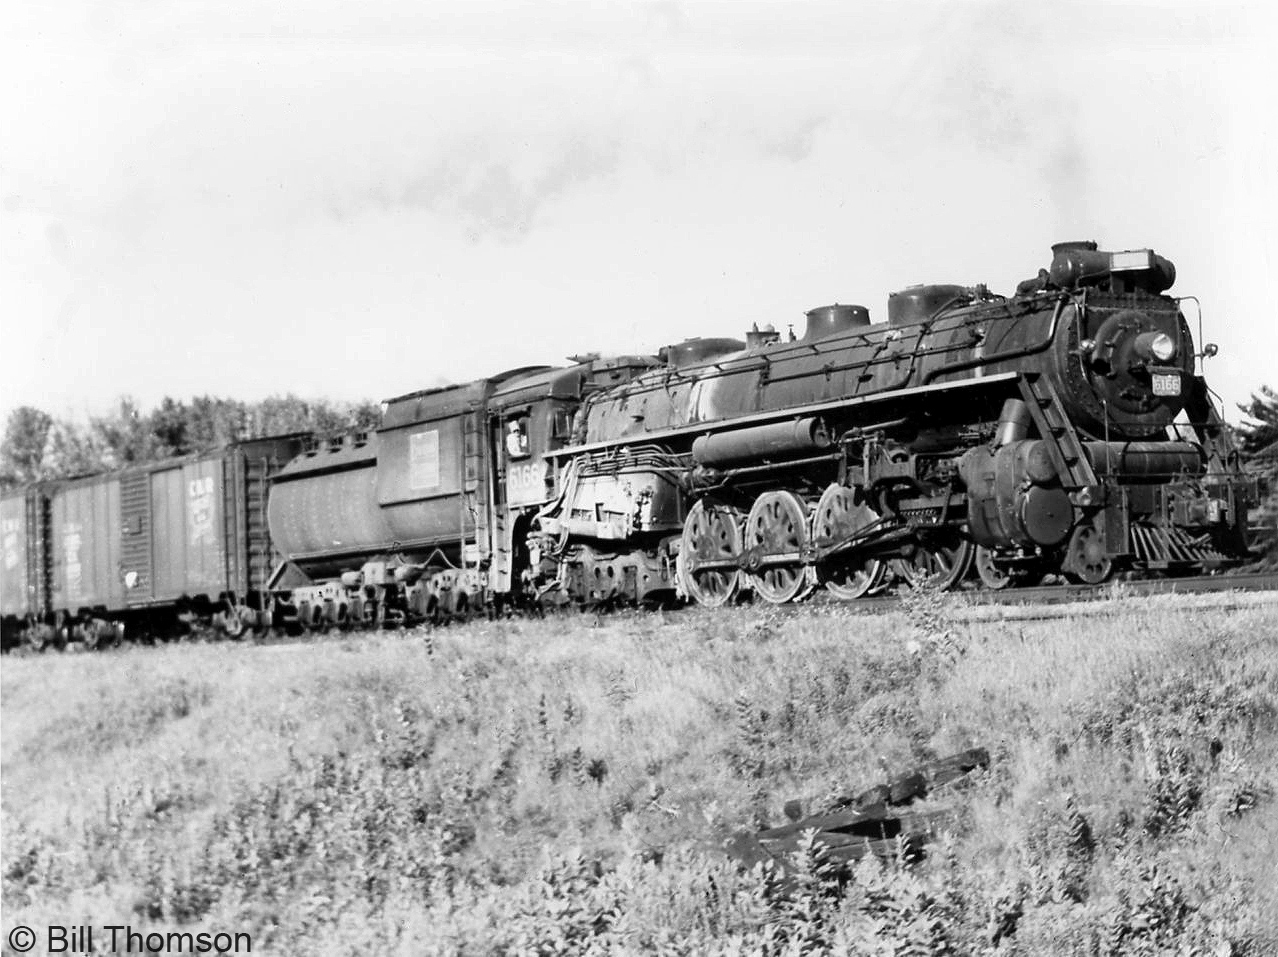 CN 4-8-4 Northern 6166 heads a westbought freight through Port Credit in 1956. Built by MLW in 1940 as part of the U2e class of Northerns (6165-6179), she would be retired and scrapped a few years later in 1959.